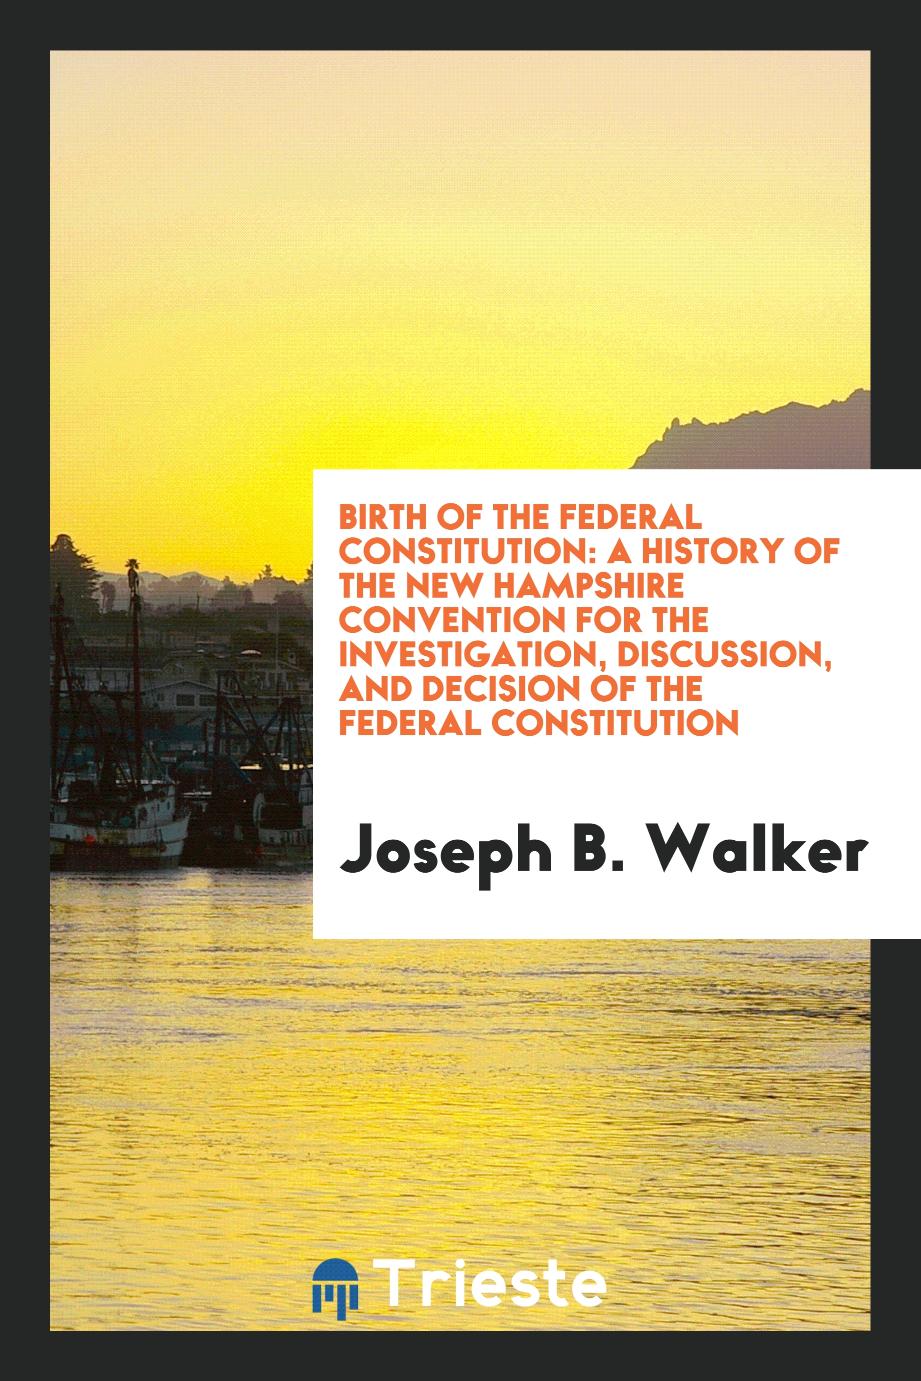 Birth of the Federal Constitution: A History of the New Hampshire Convention for the Investigation, Discussion, and Decision of the Federal Constitution